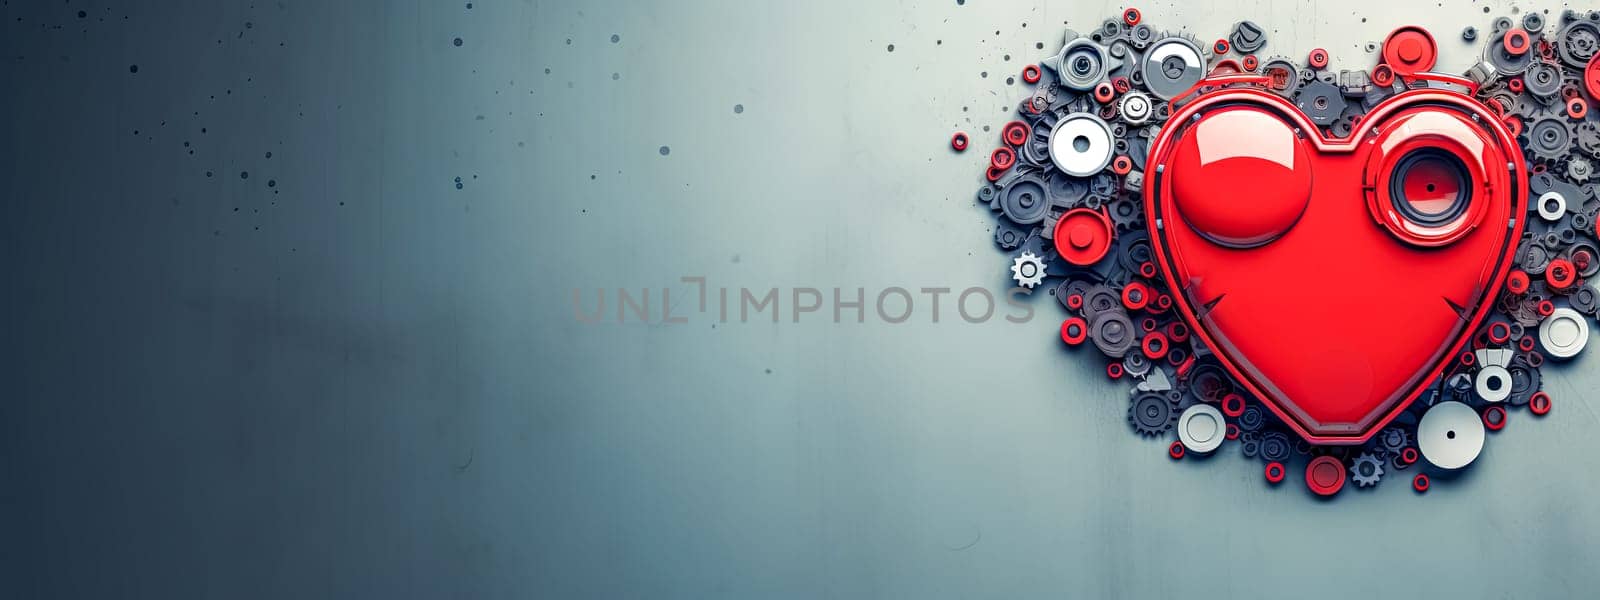 Mechanical Heart Design with Gears and Cogs by Edophoto